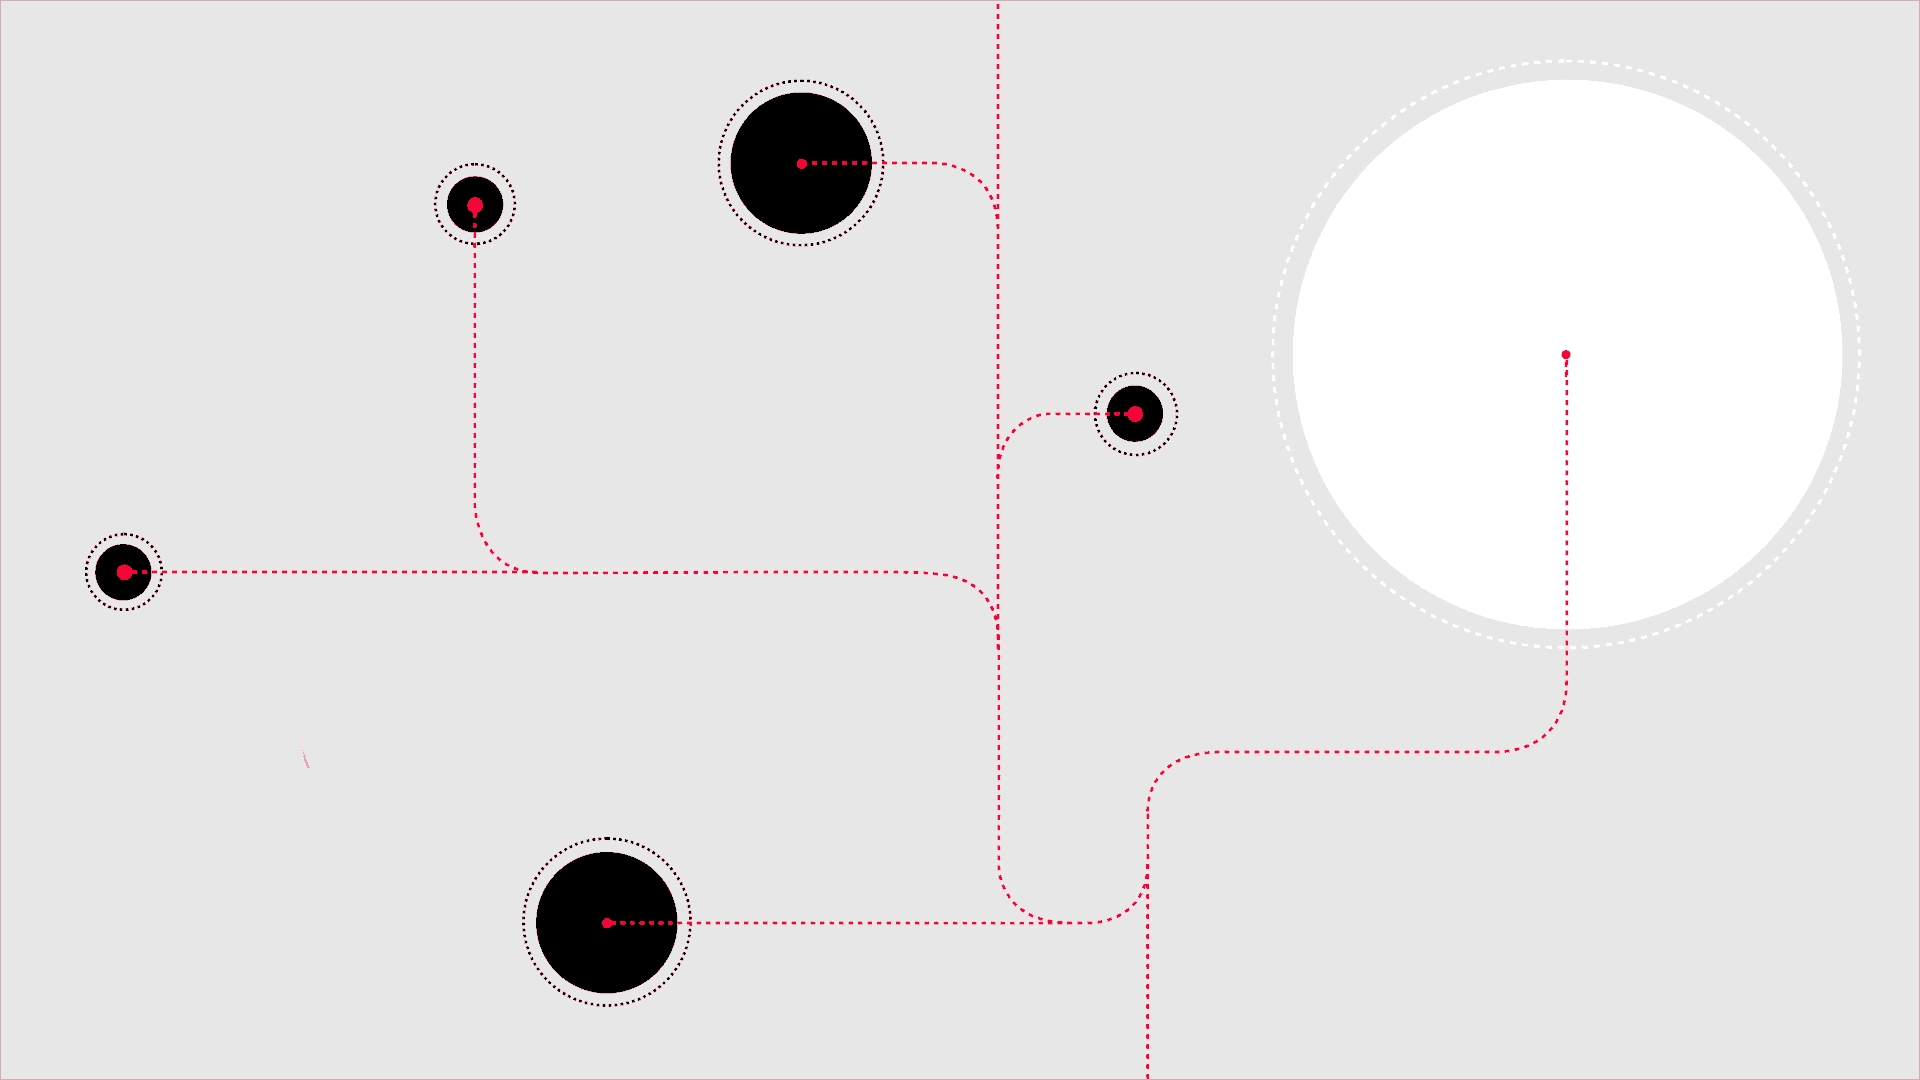 On the illustration there are several partly pulsating circles in different colors and shapes, which are connected by regularly recurring lines.